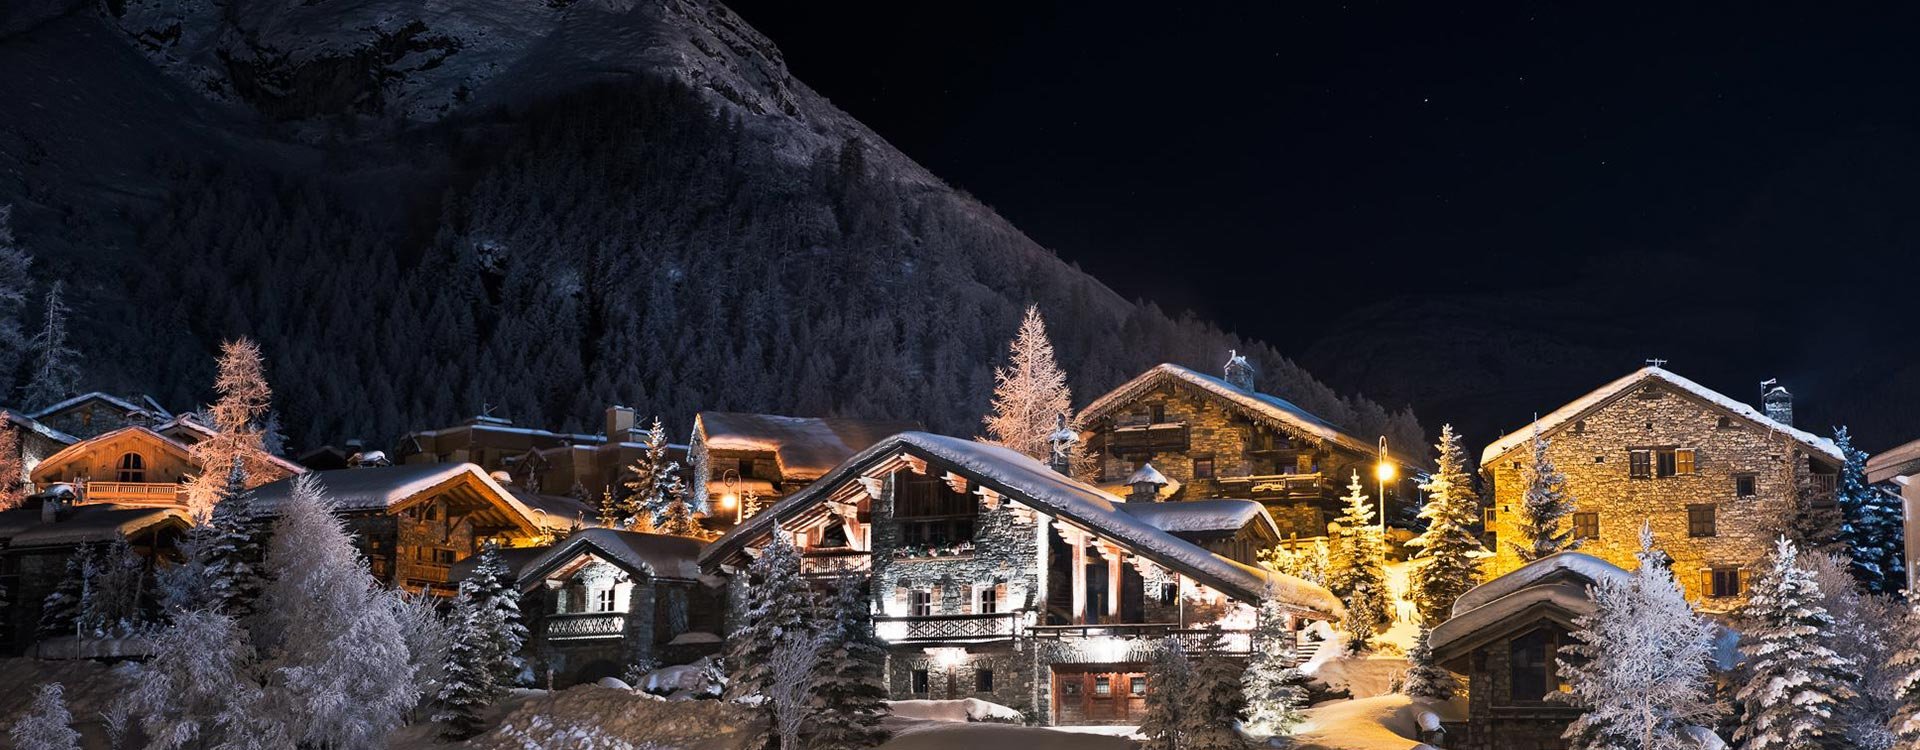 Val D'isere in the night